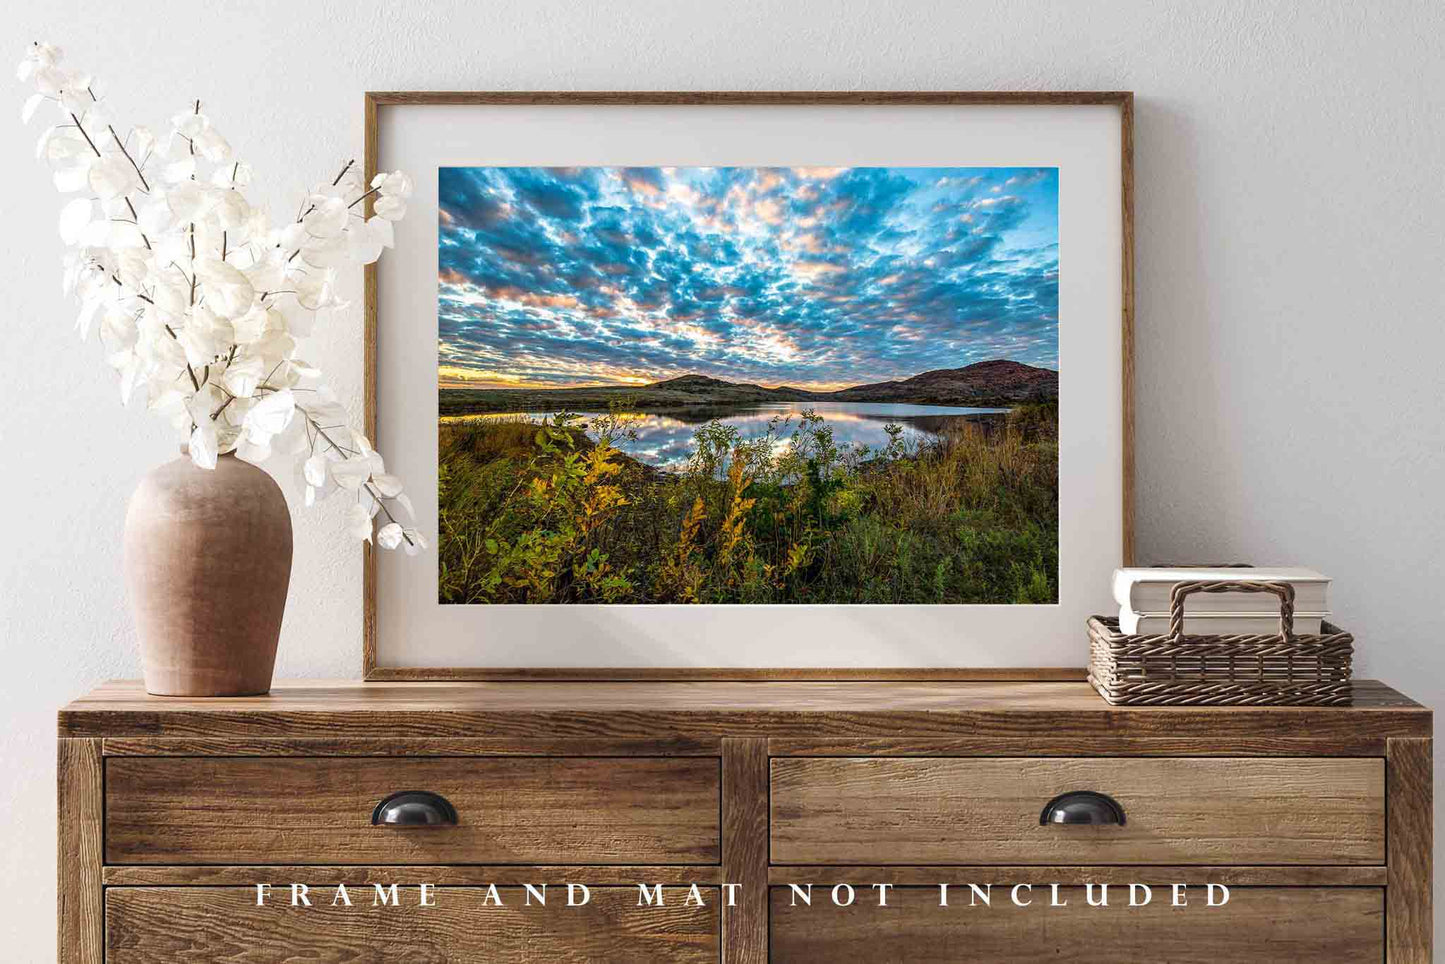 Wichita Mountains Photography Print | Landscape Picture | Oklahoma Wall Art | Scenic Sky Photo | Nature Decor | Not Framed